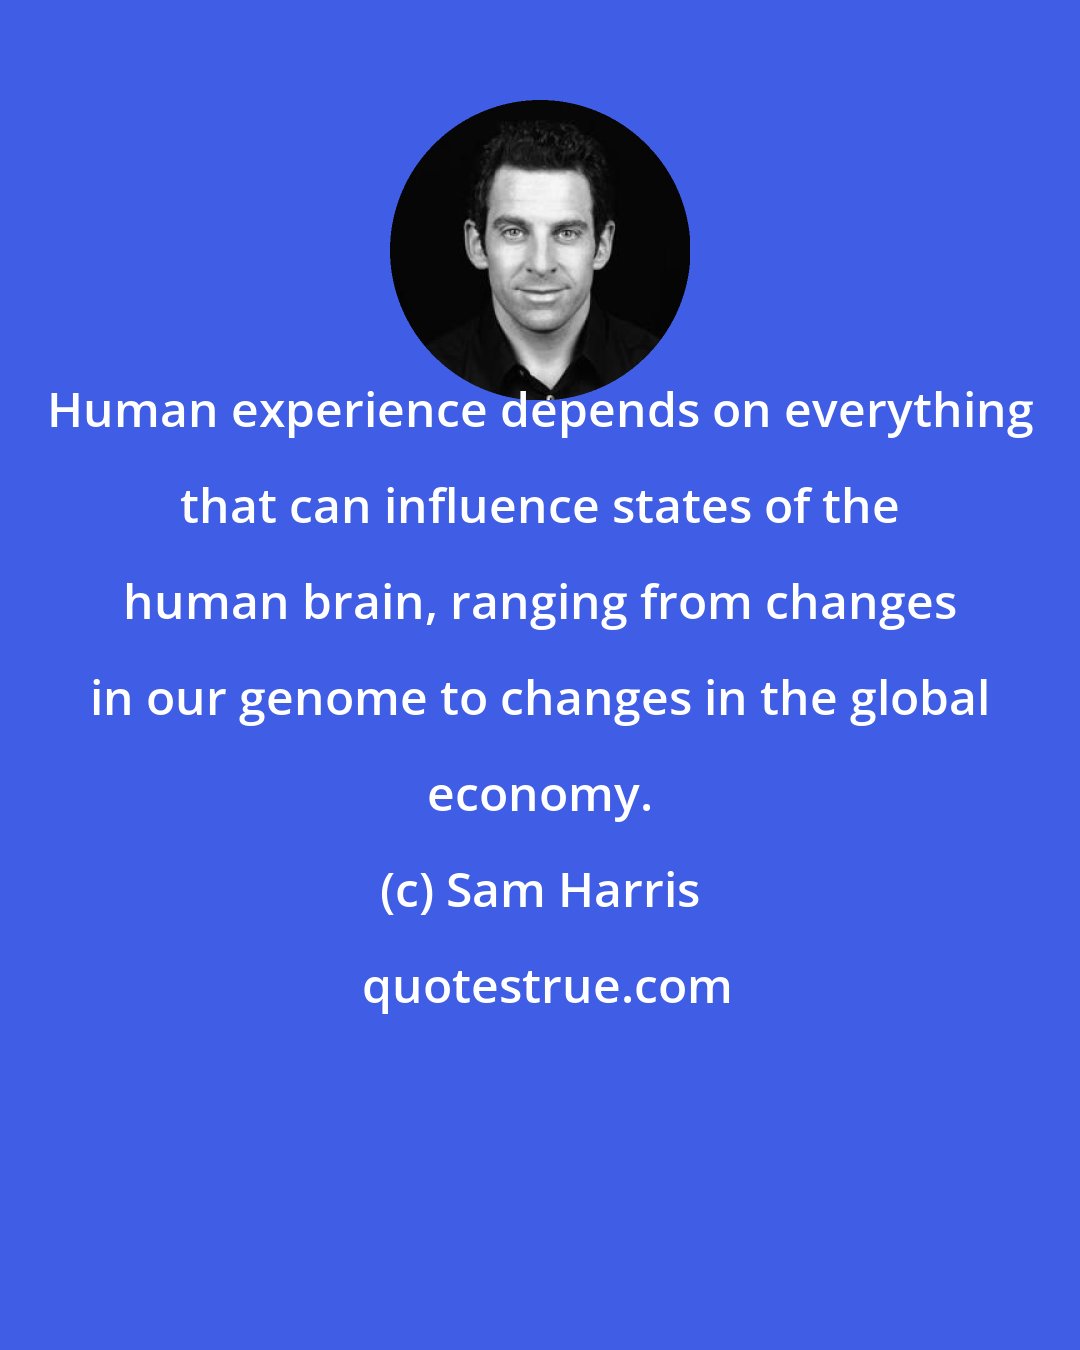 Sam Harris: Human experience depends on everything that can influence states of the human brain, ranging from changes in our genome to changes in the global economy.